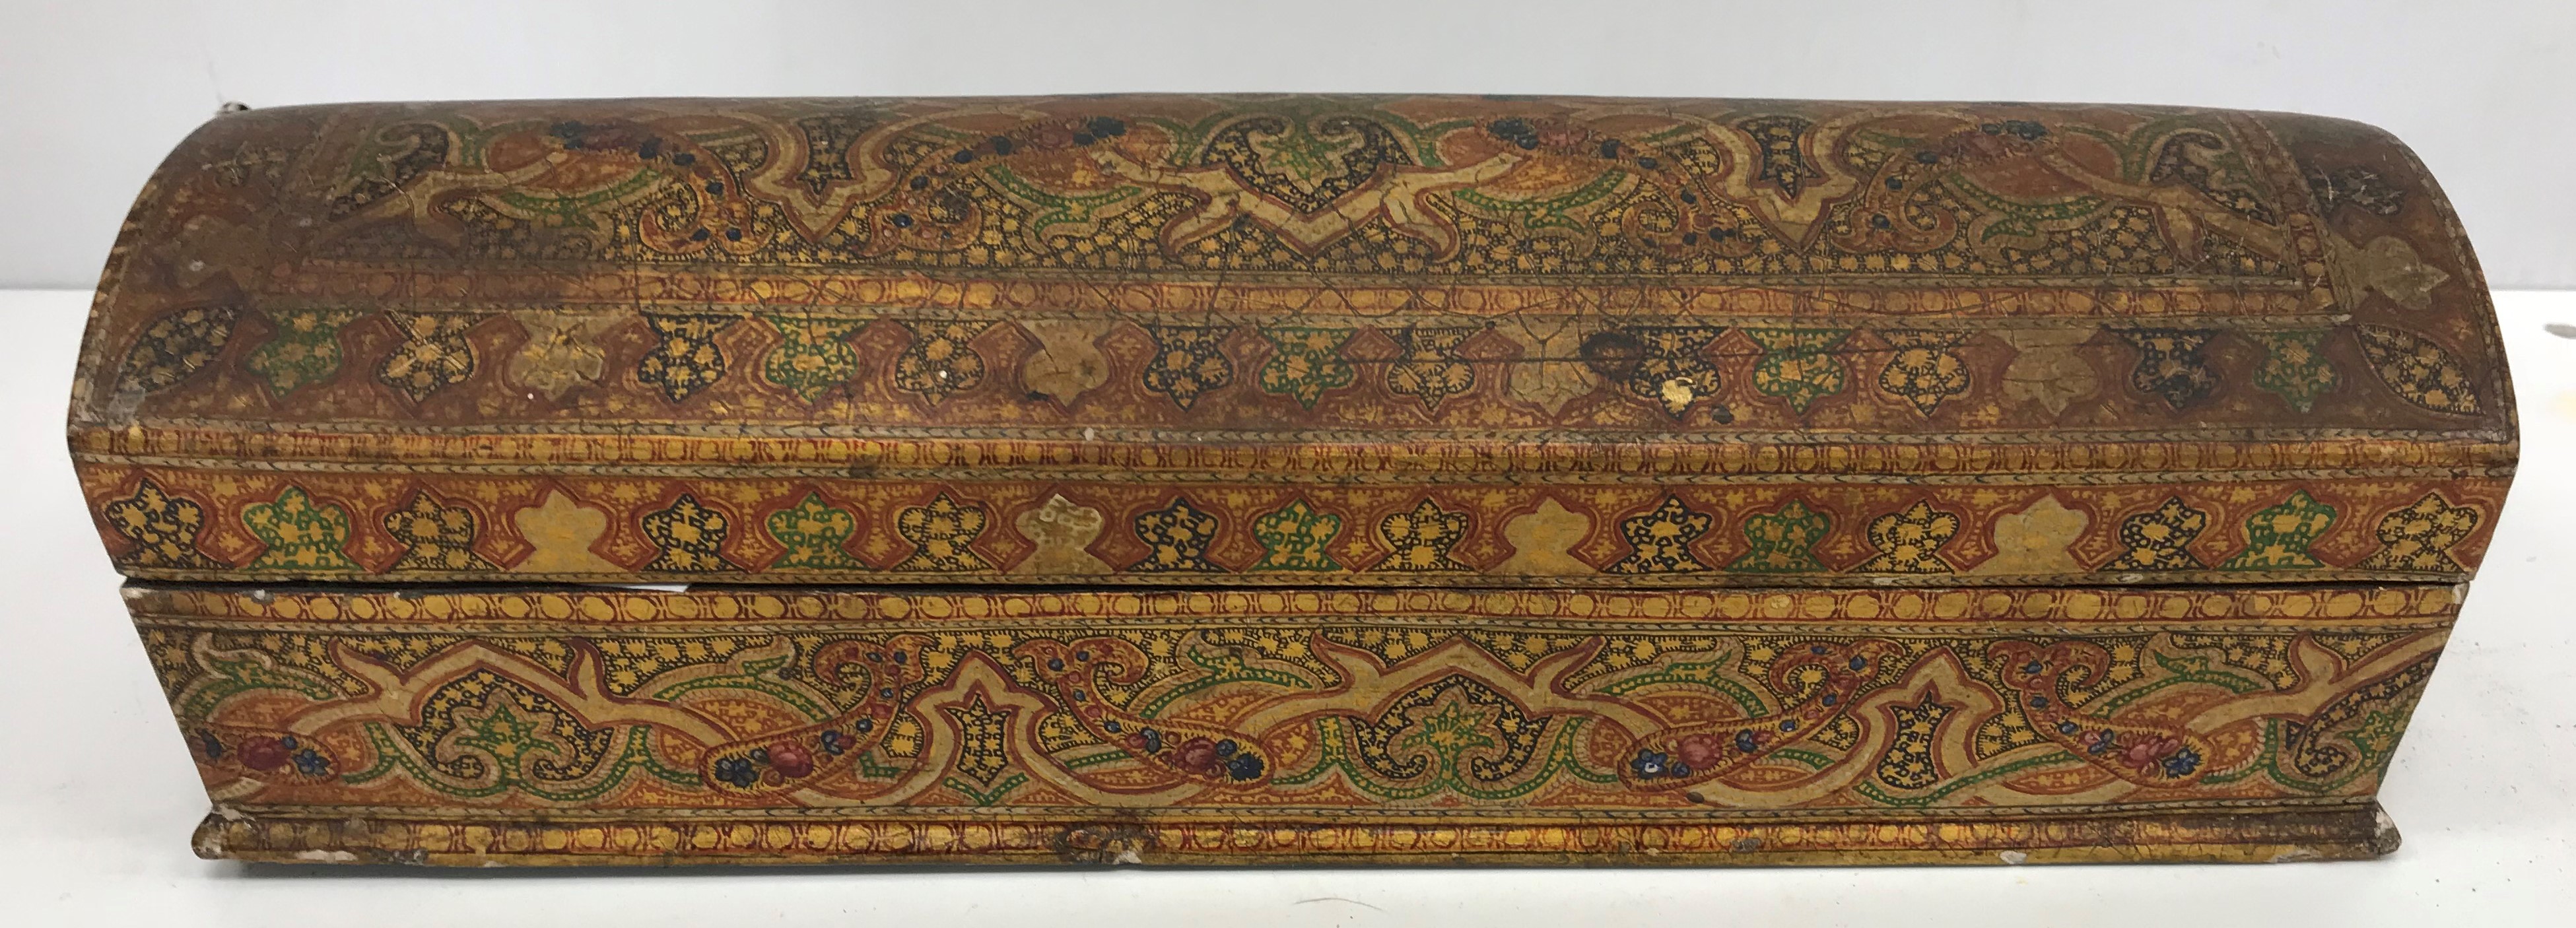 A Persian style lacquered pen box with domed lid 28 cm wide x 9 cm deep x 8.